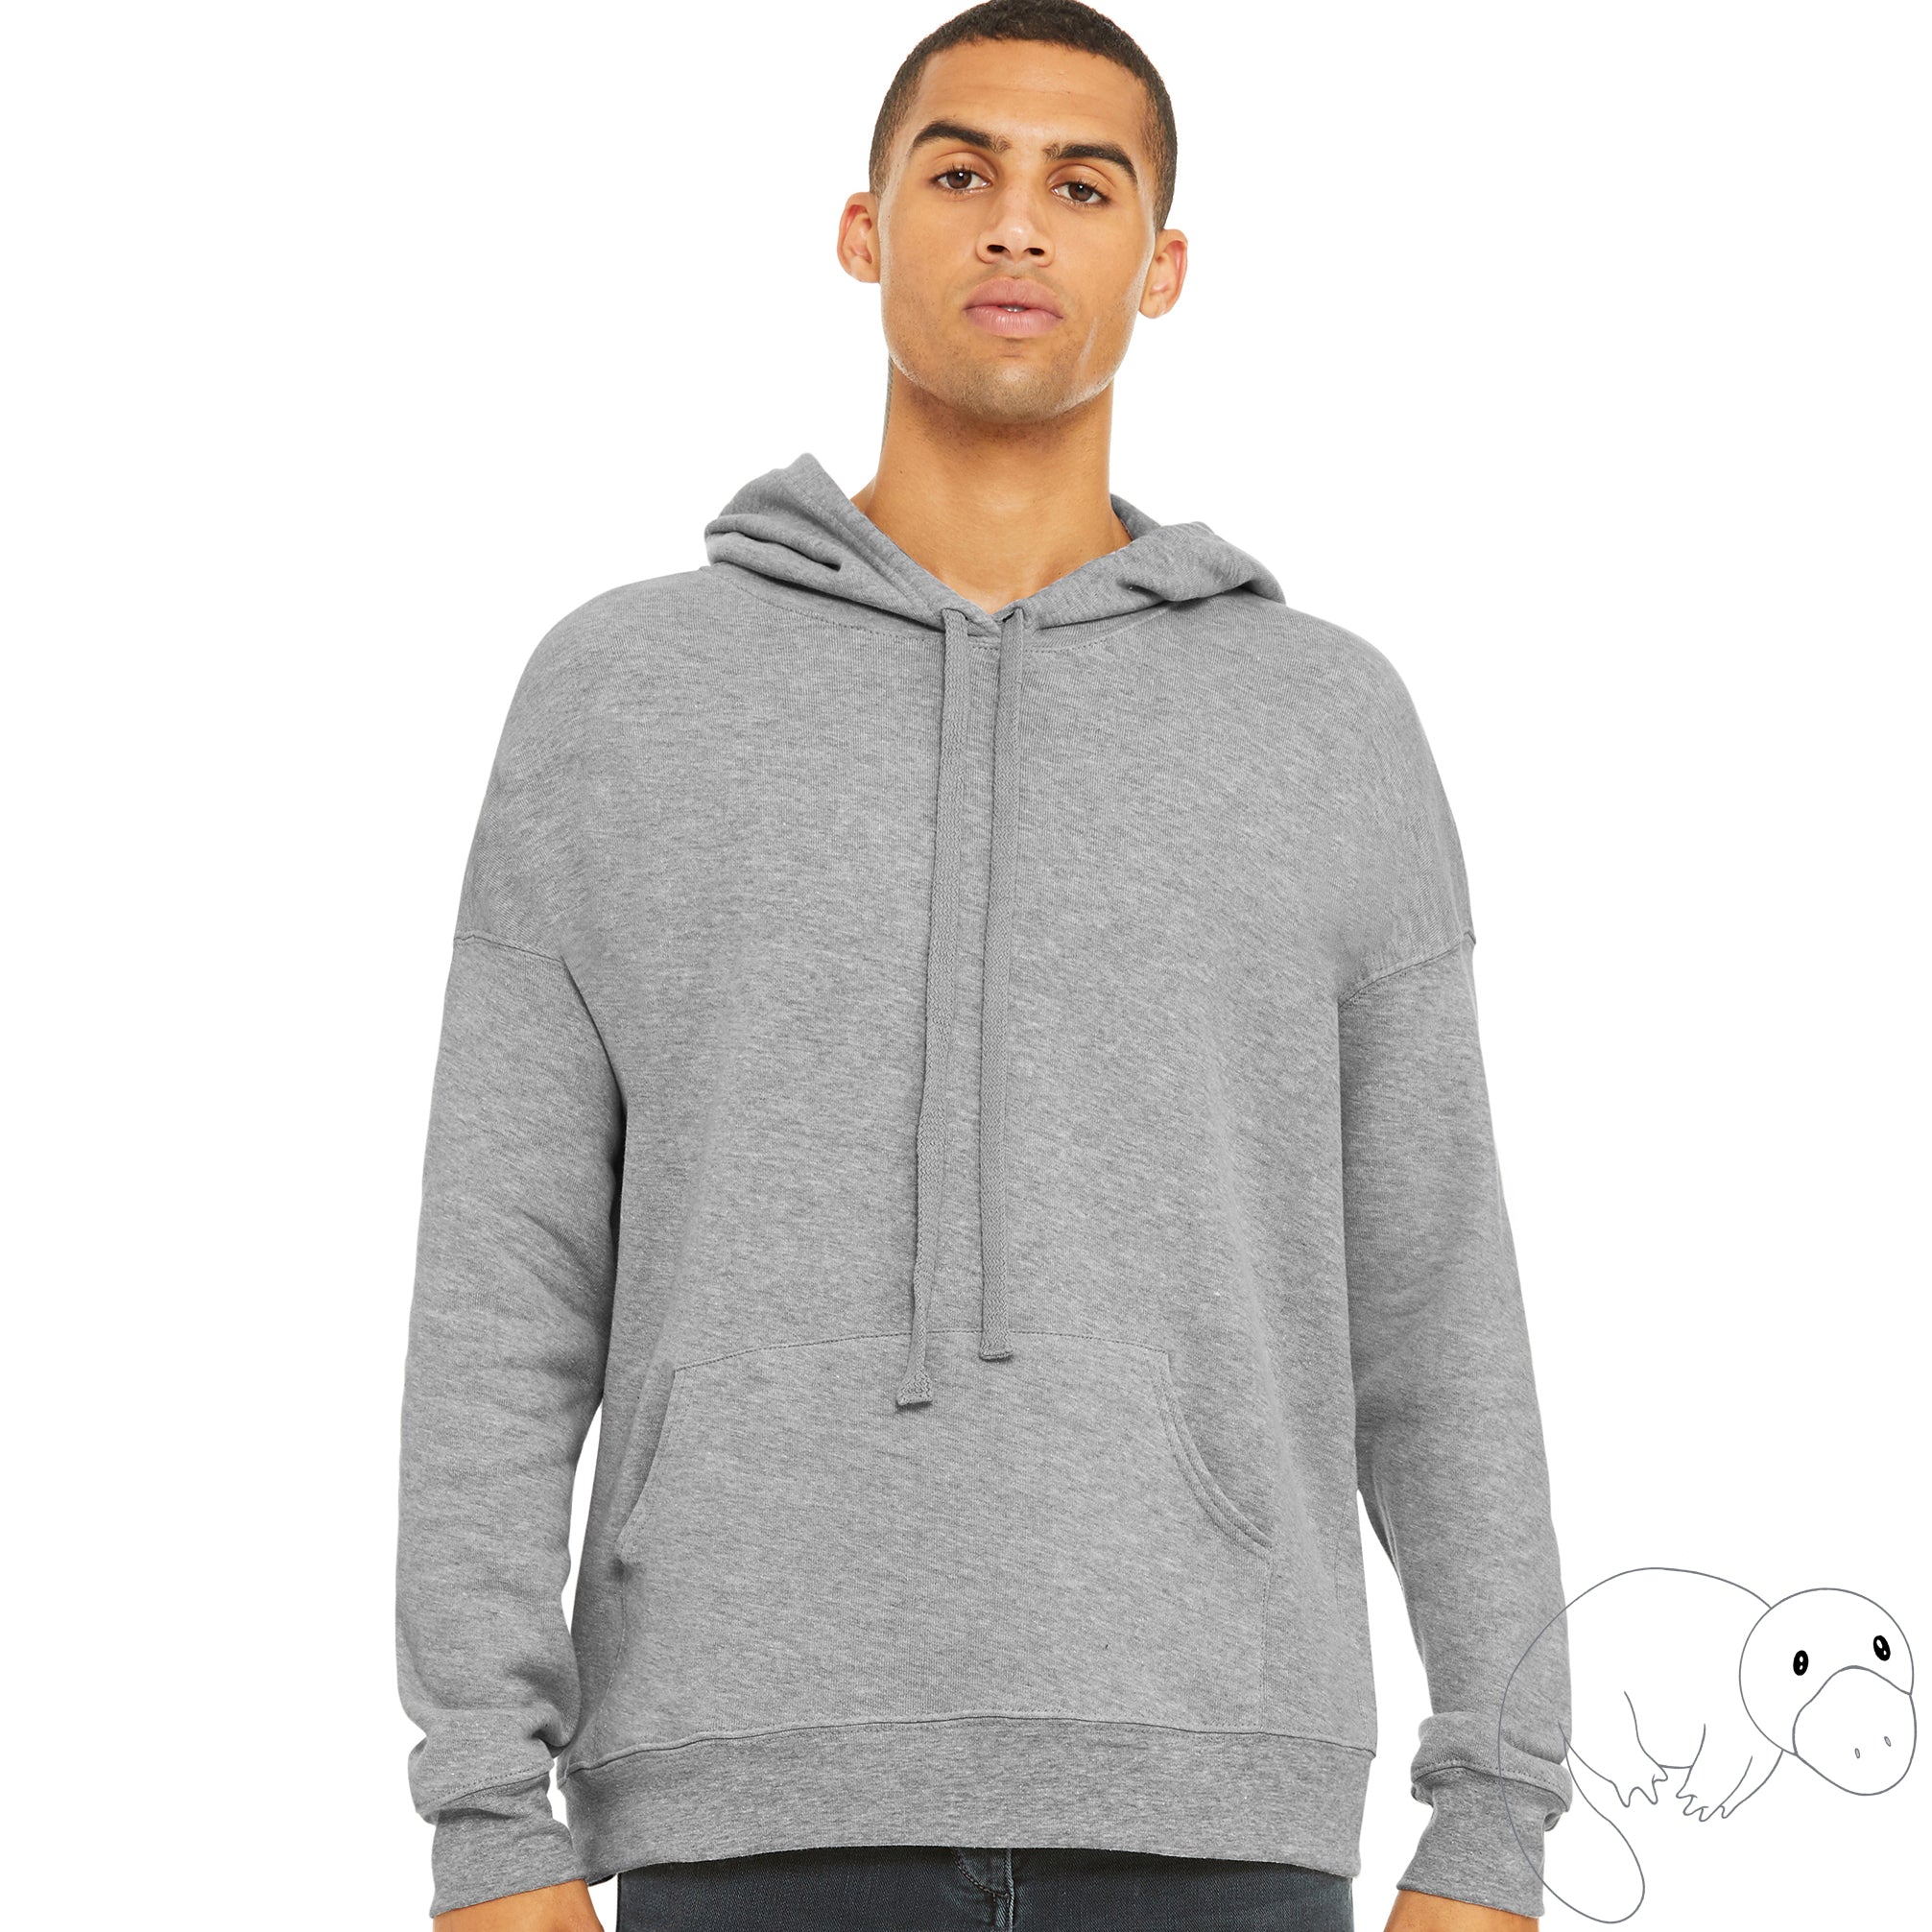 new-product-soft-sweatshirt-cozy-warm-light-grey-softest-hoodie-face-mask-Plats-Hoodie-facemask-all-in-one-convertible-plats-hoodie-platinum-platypus-guy-millennial-boy-man-beautiful-eyes-blue-green-young-cute